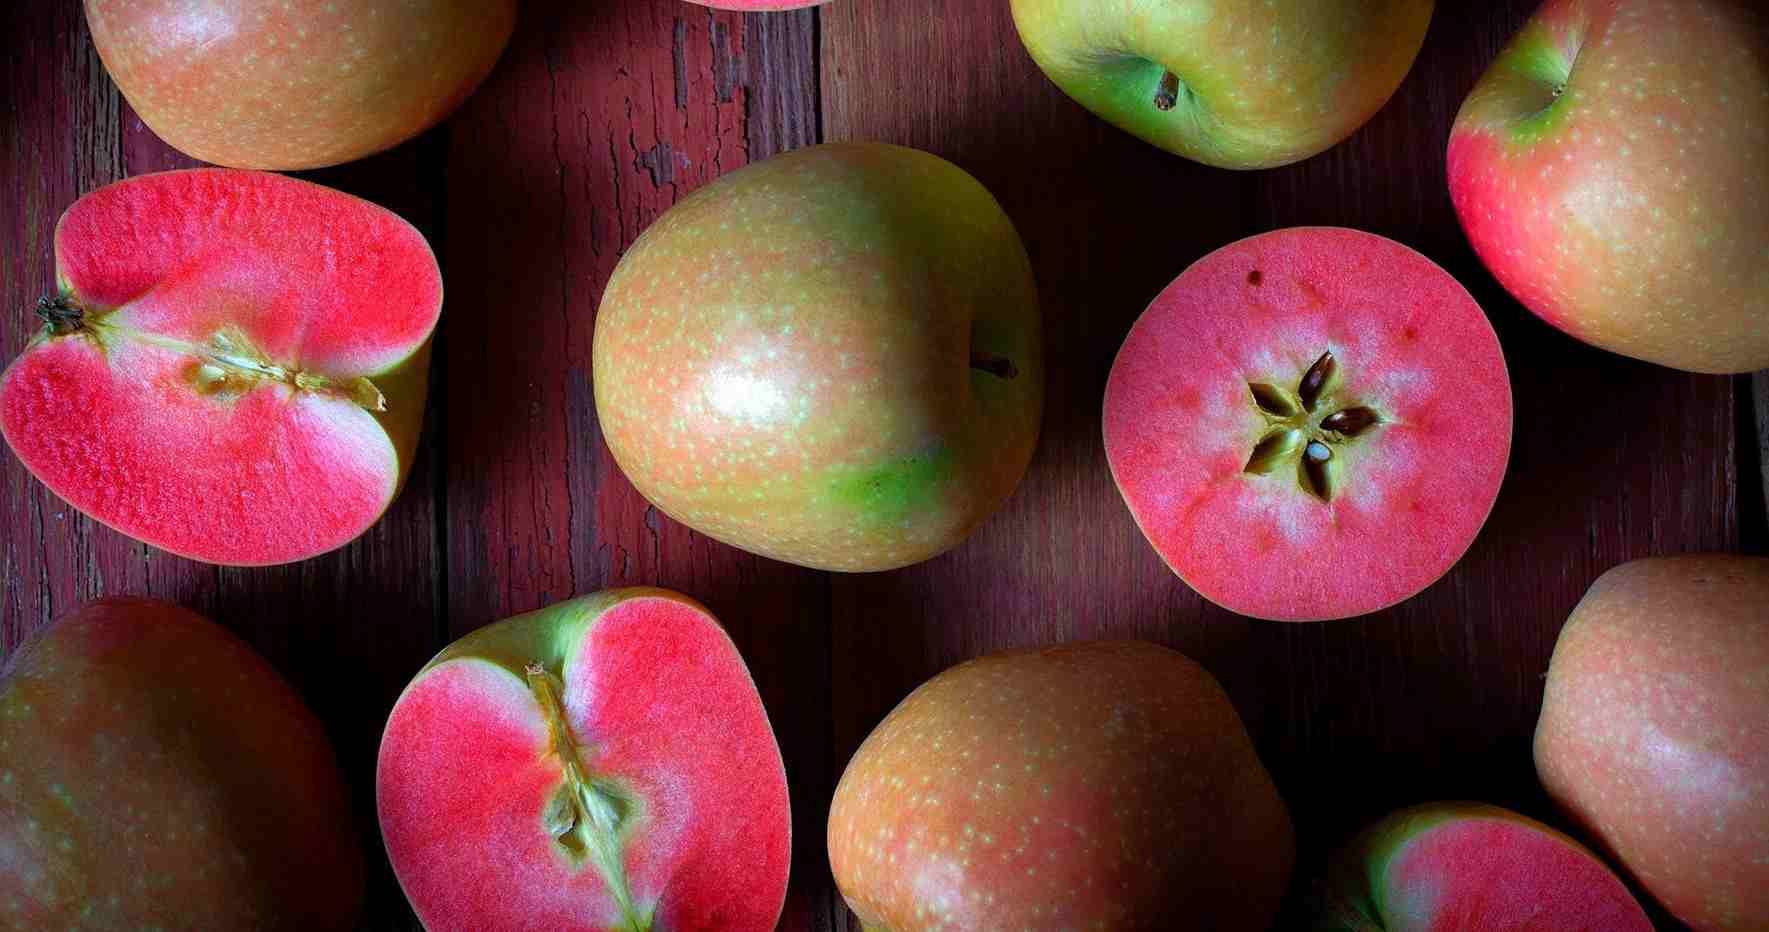 Are pink lady apples healthy